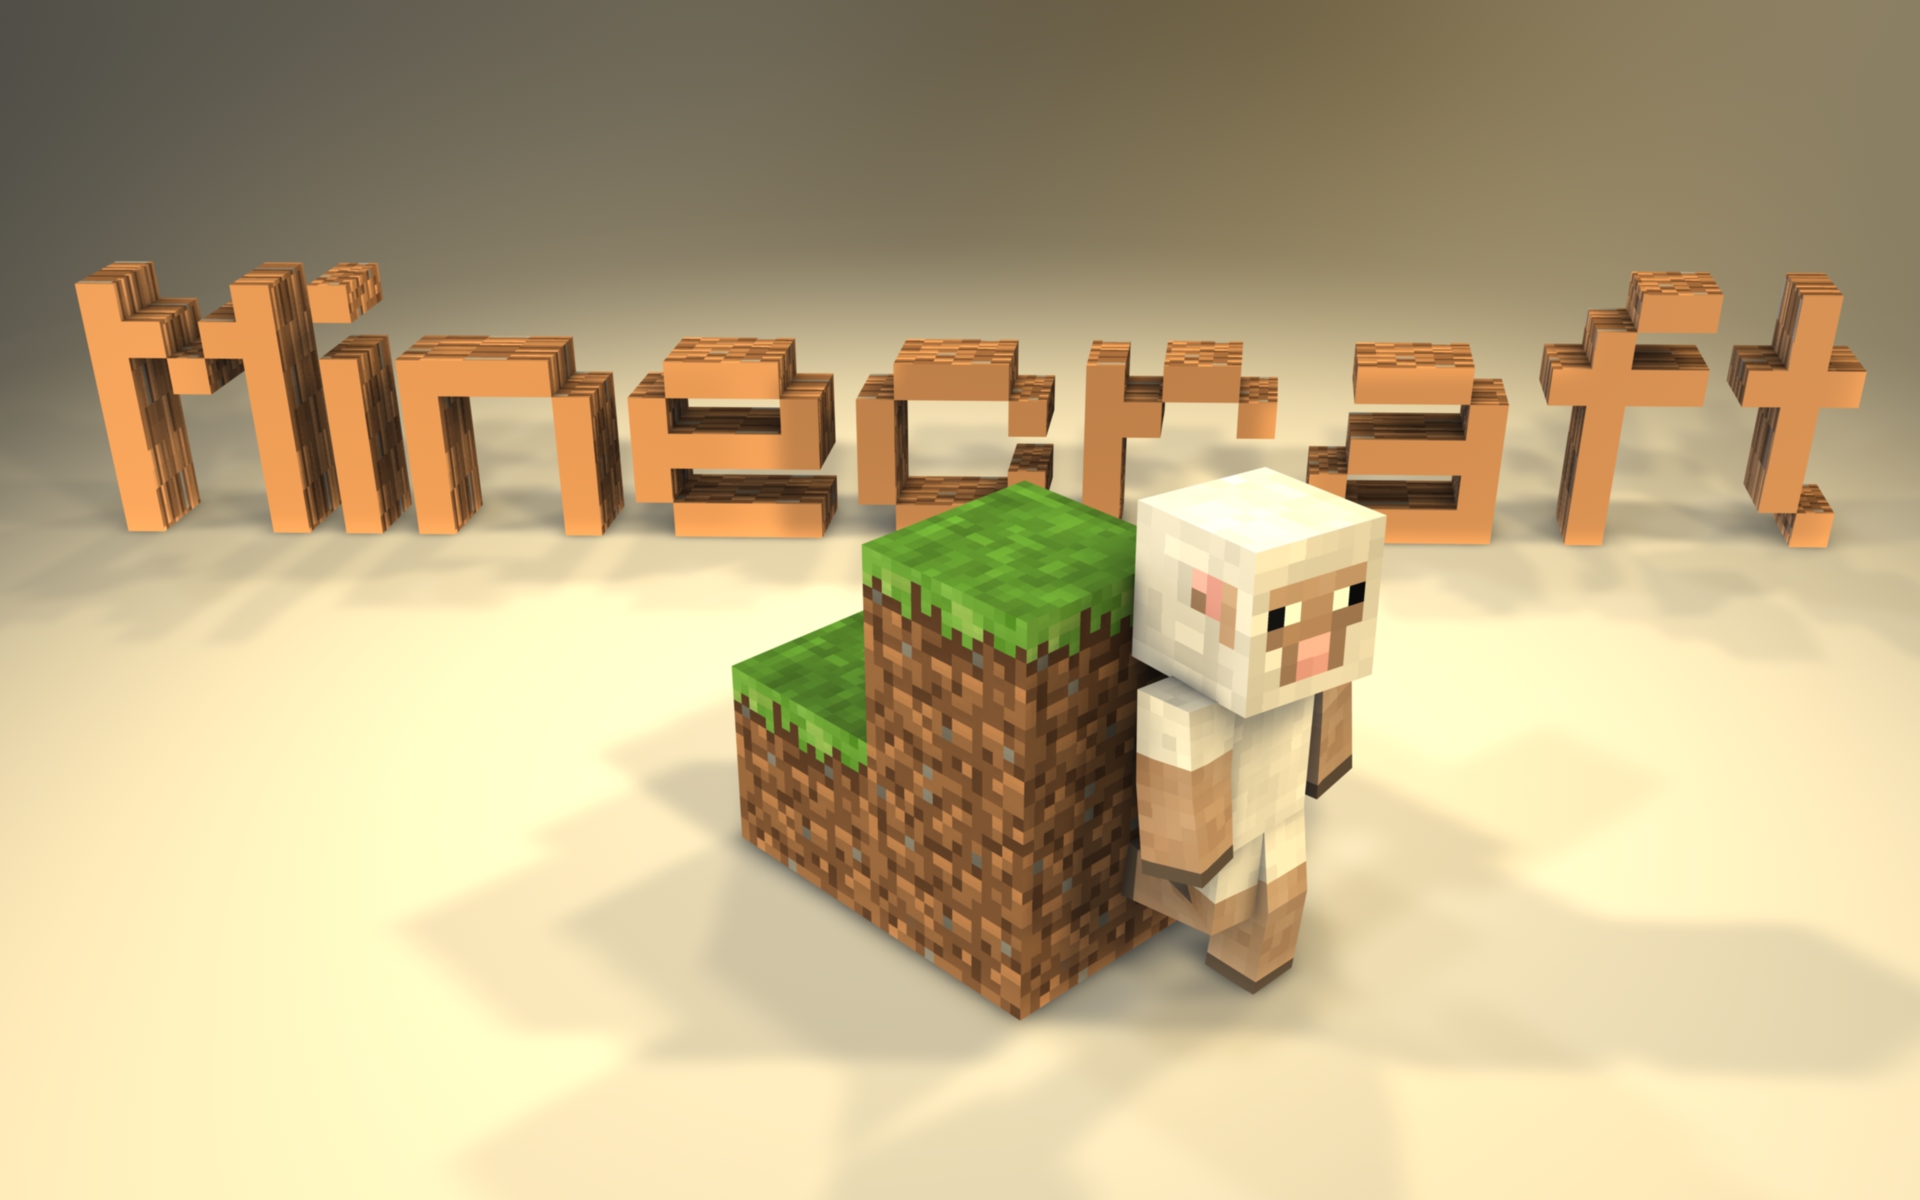 Awesome Minecraft Wallpaper In HD Design Utopia Trend